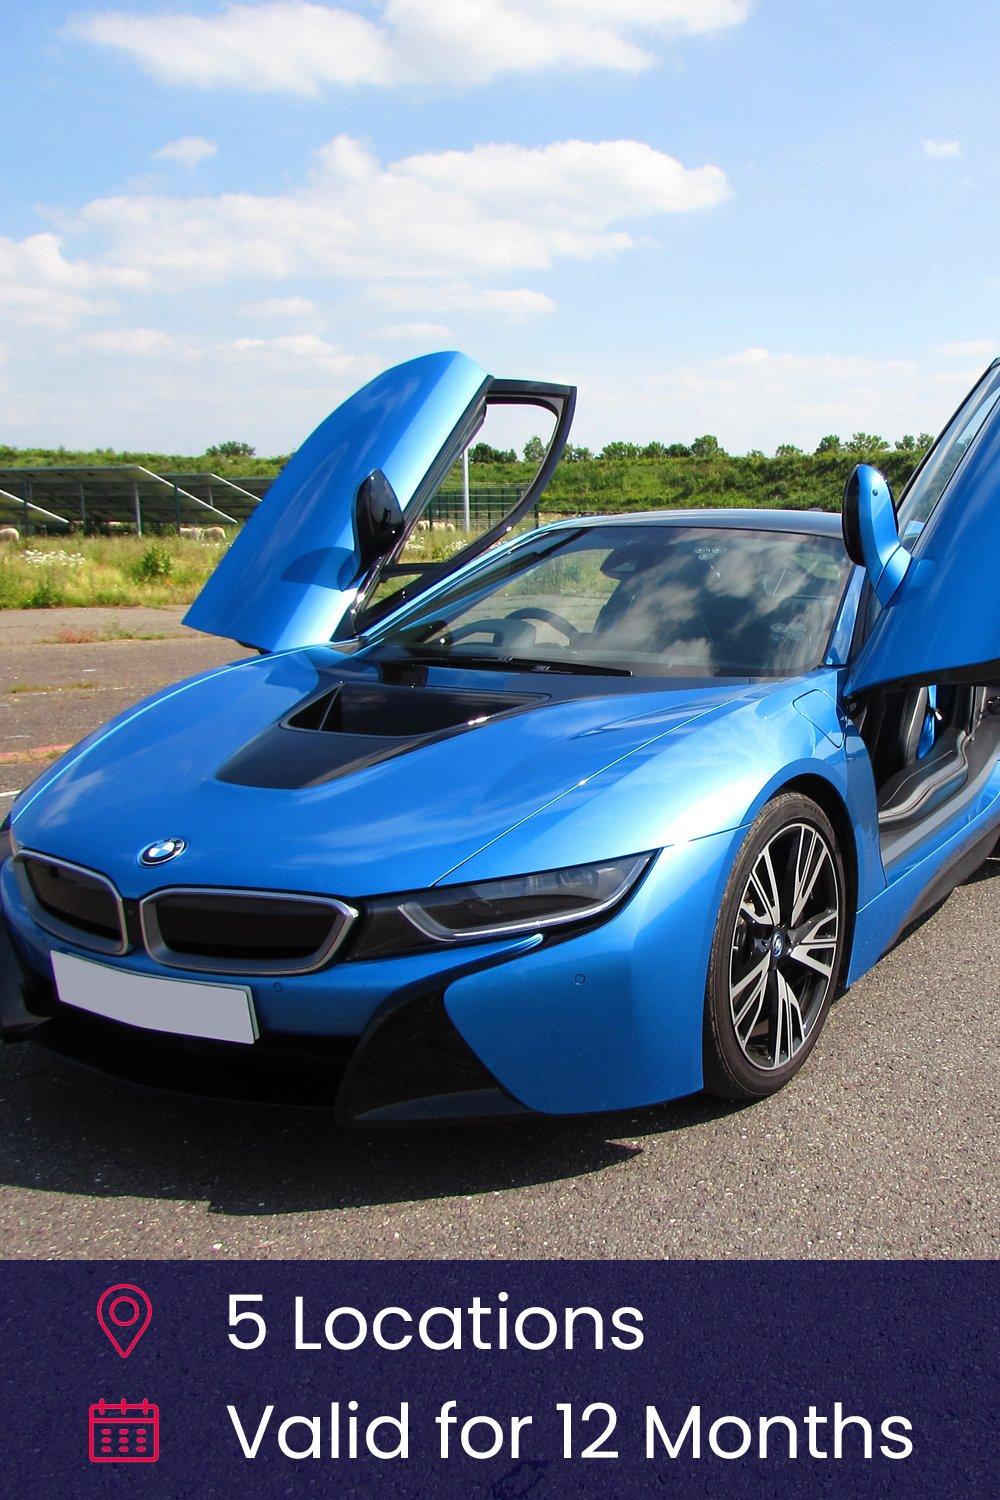 Electric Supercar Blast - BMW i8 Gift Experience